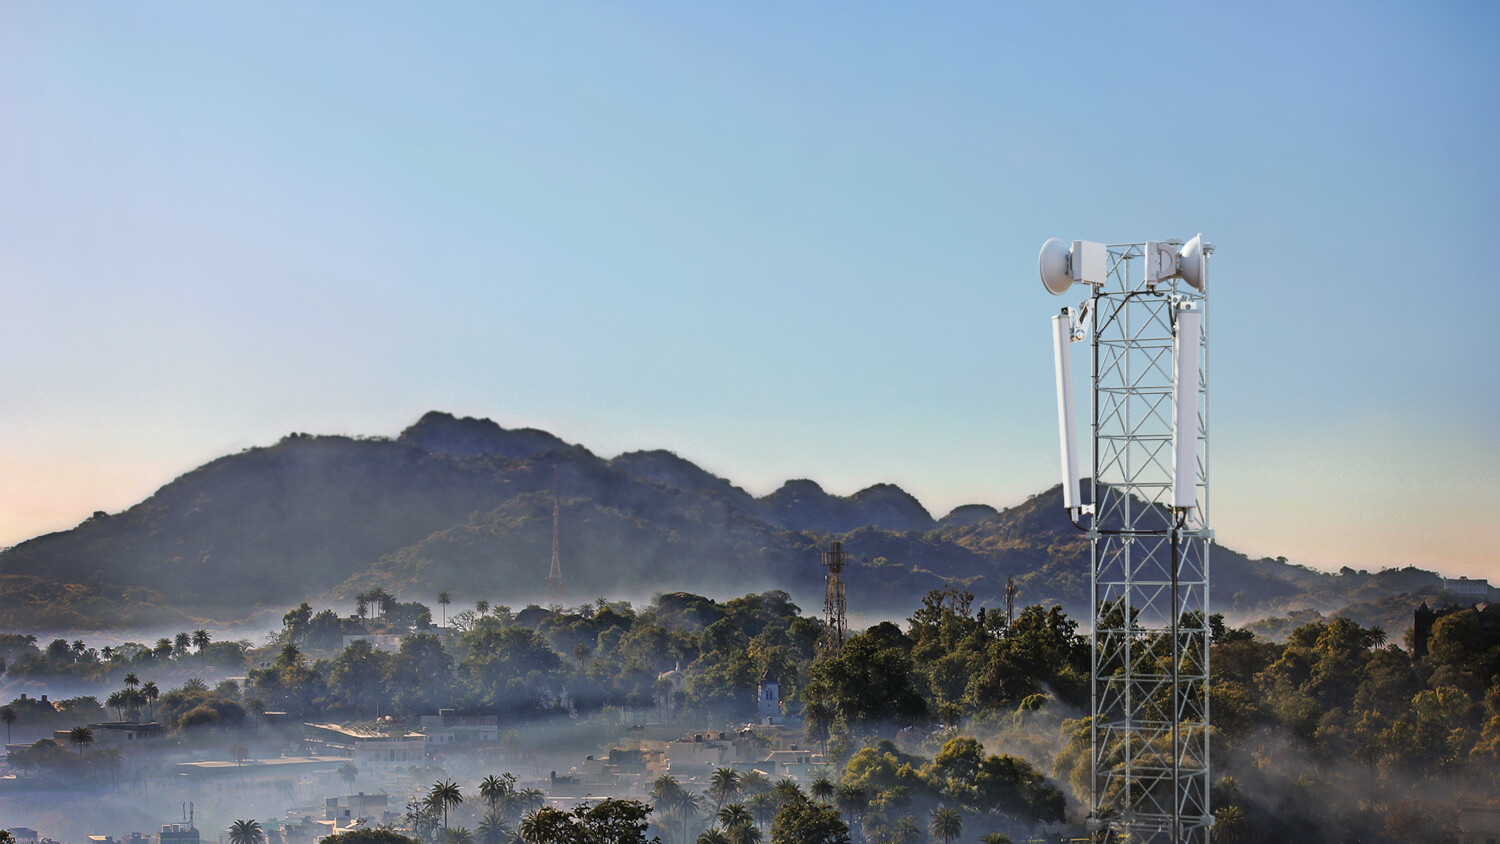 5 key facts about 5G radio access networks